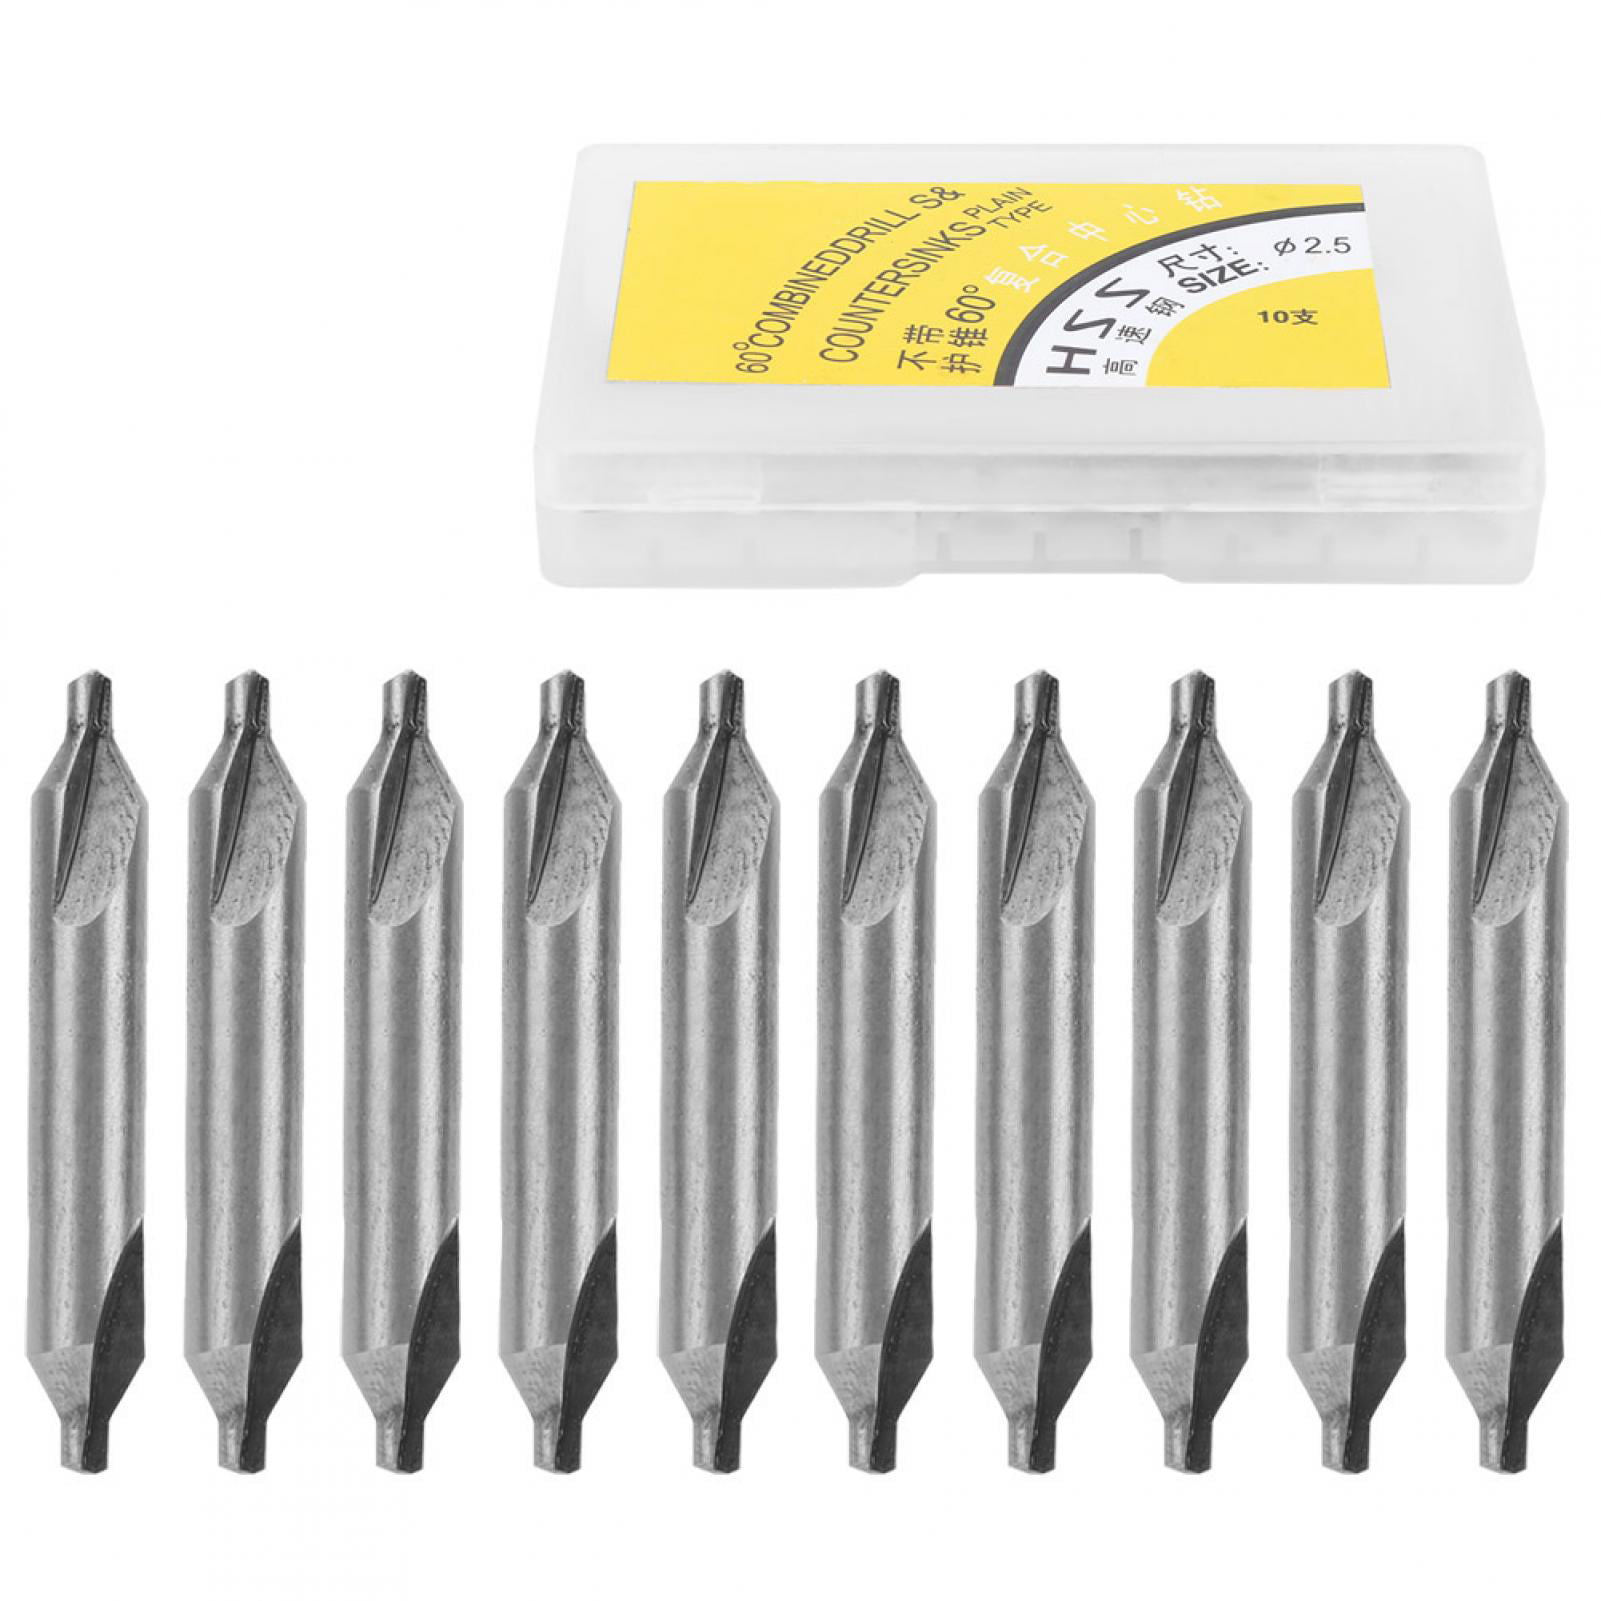 New Set of 10 #60 HSS Wire Gauge Twist Drill Bits For Metal Working & Drilling